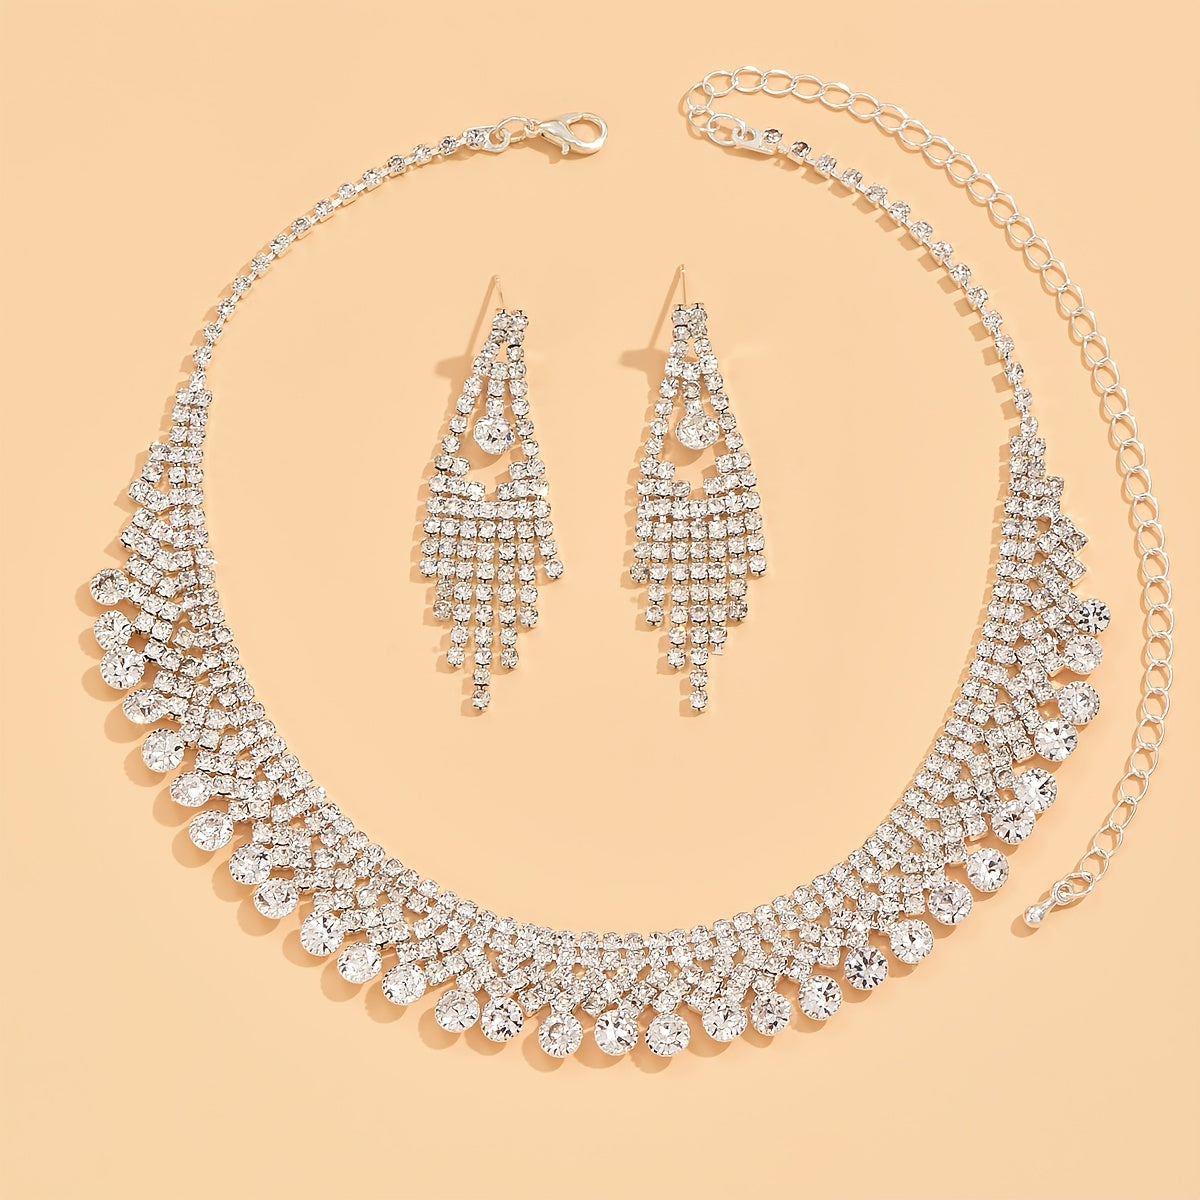 2pcs/set Elegant Crystal Stone Tassel Jewelry Set - Silver Plated Earrings and Necklace